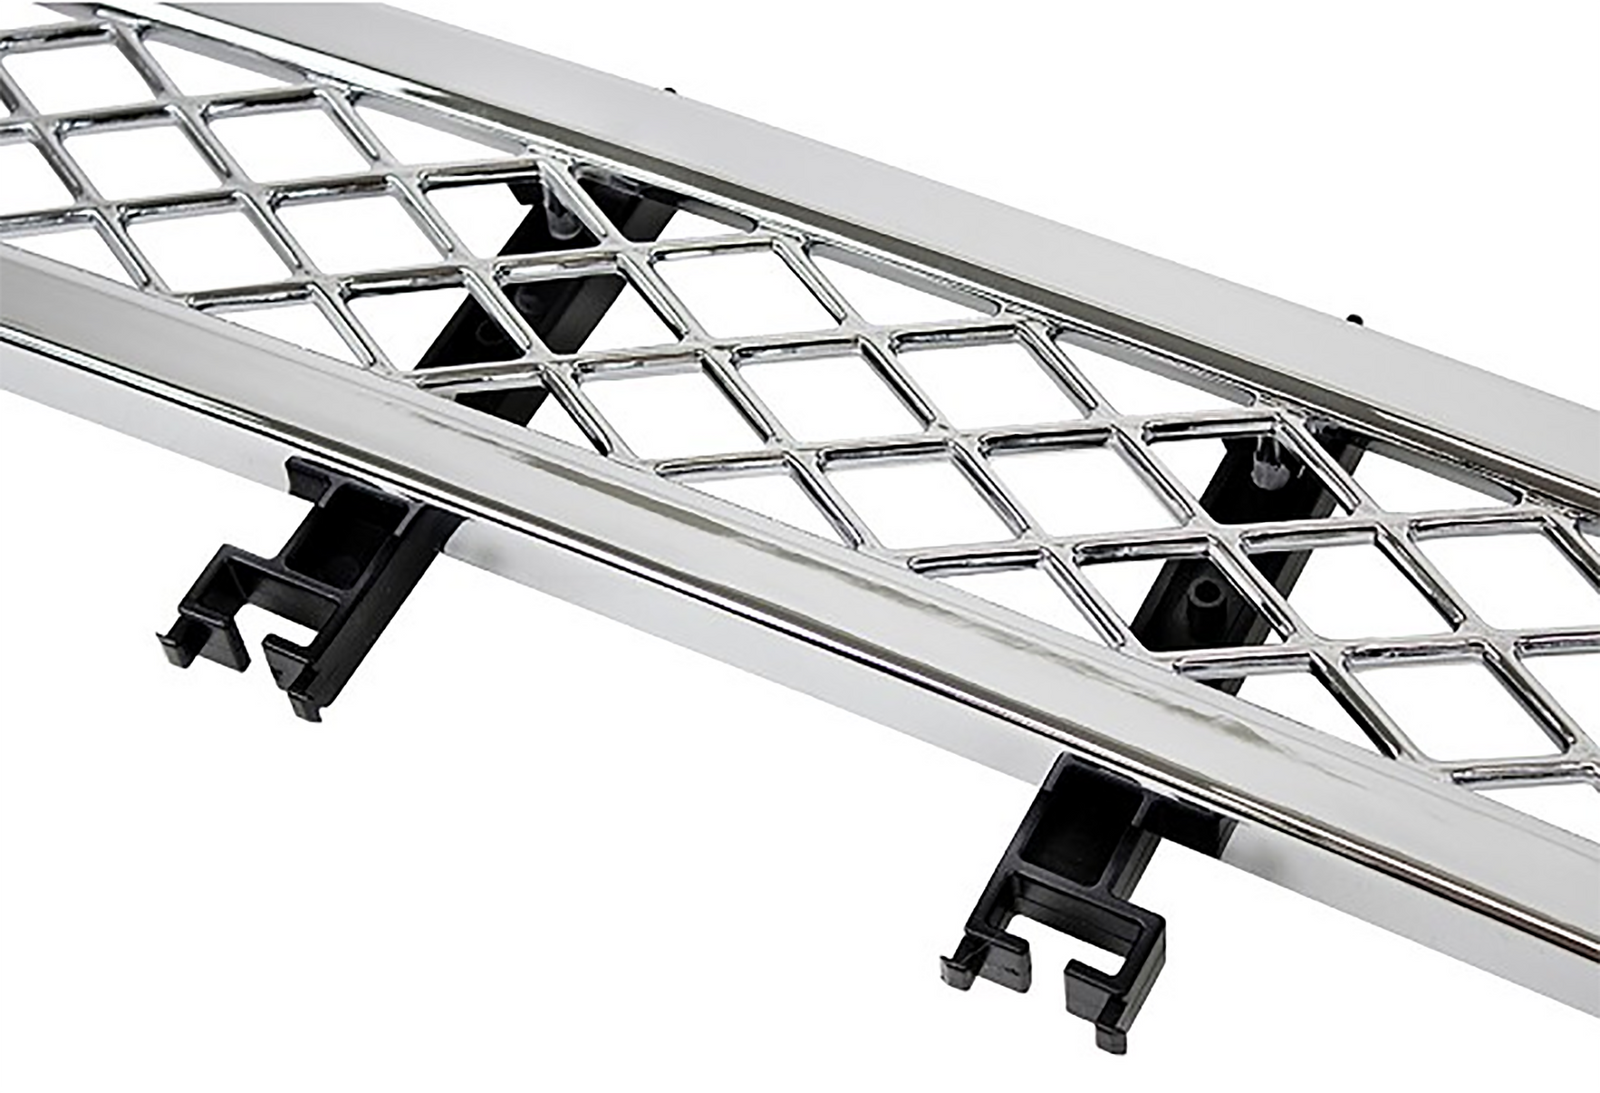 2009-2014 F150 Mesh Lower Grille / Limited Chrome